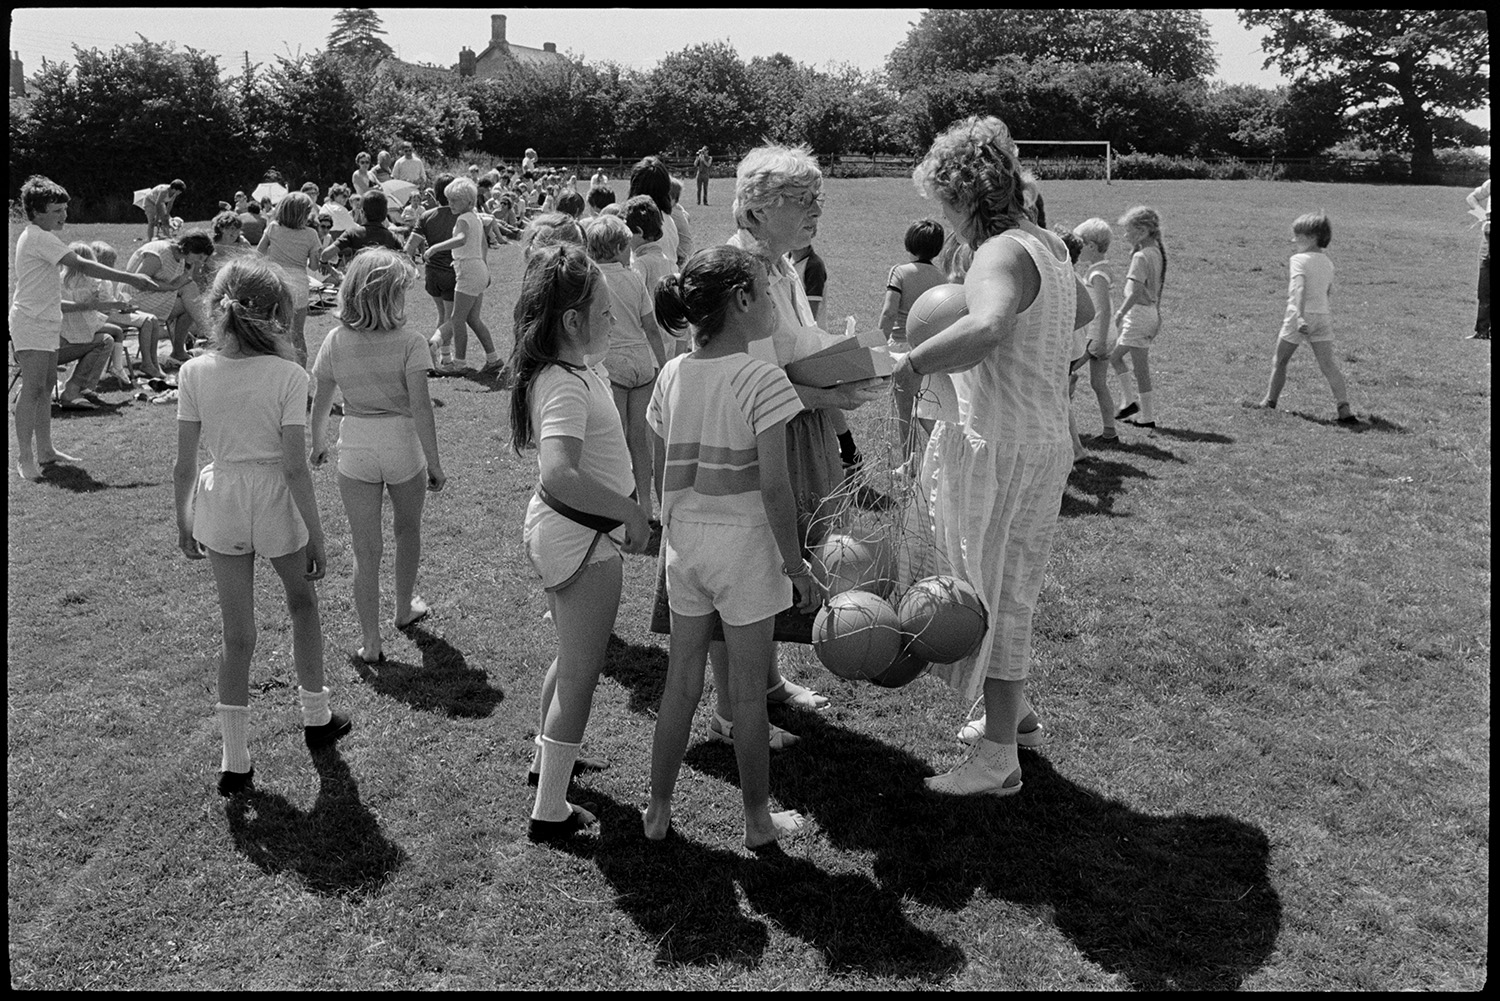 School sports day, races, people sitting in sun and shade waiting to run. 
[Children getting ready for races at Dolton School sports day. A teacher is holding a bag of balls and talking to another woman. Spectators are sitting along the side of the track in the sports field.]